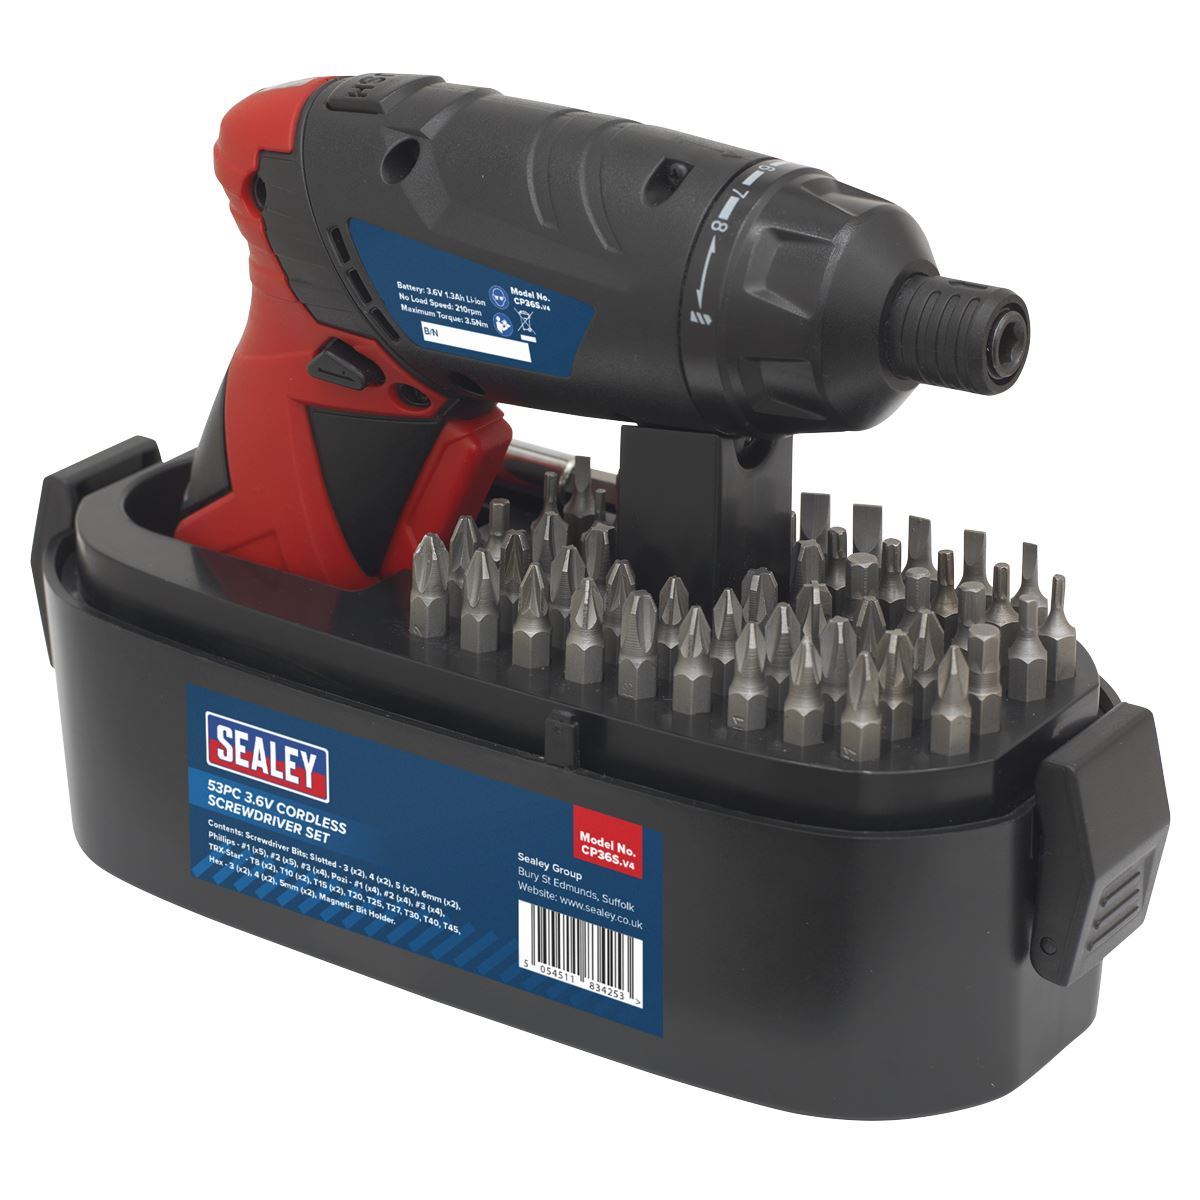 Sealey Cordless Screwdriver Set 53pc 3.6V Lithium-ion CP36S